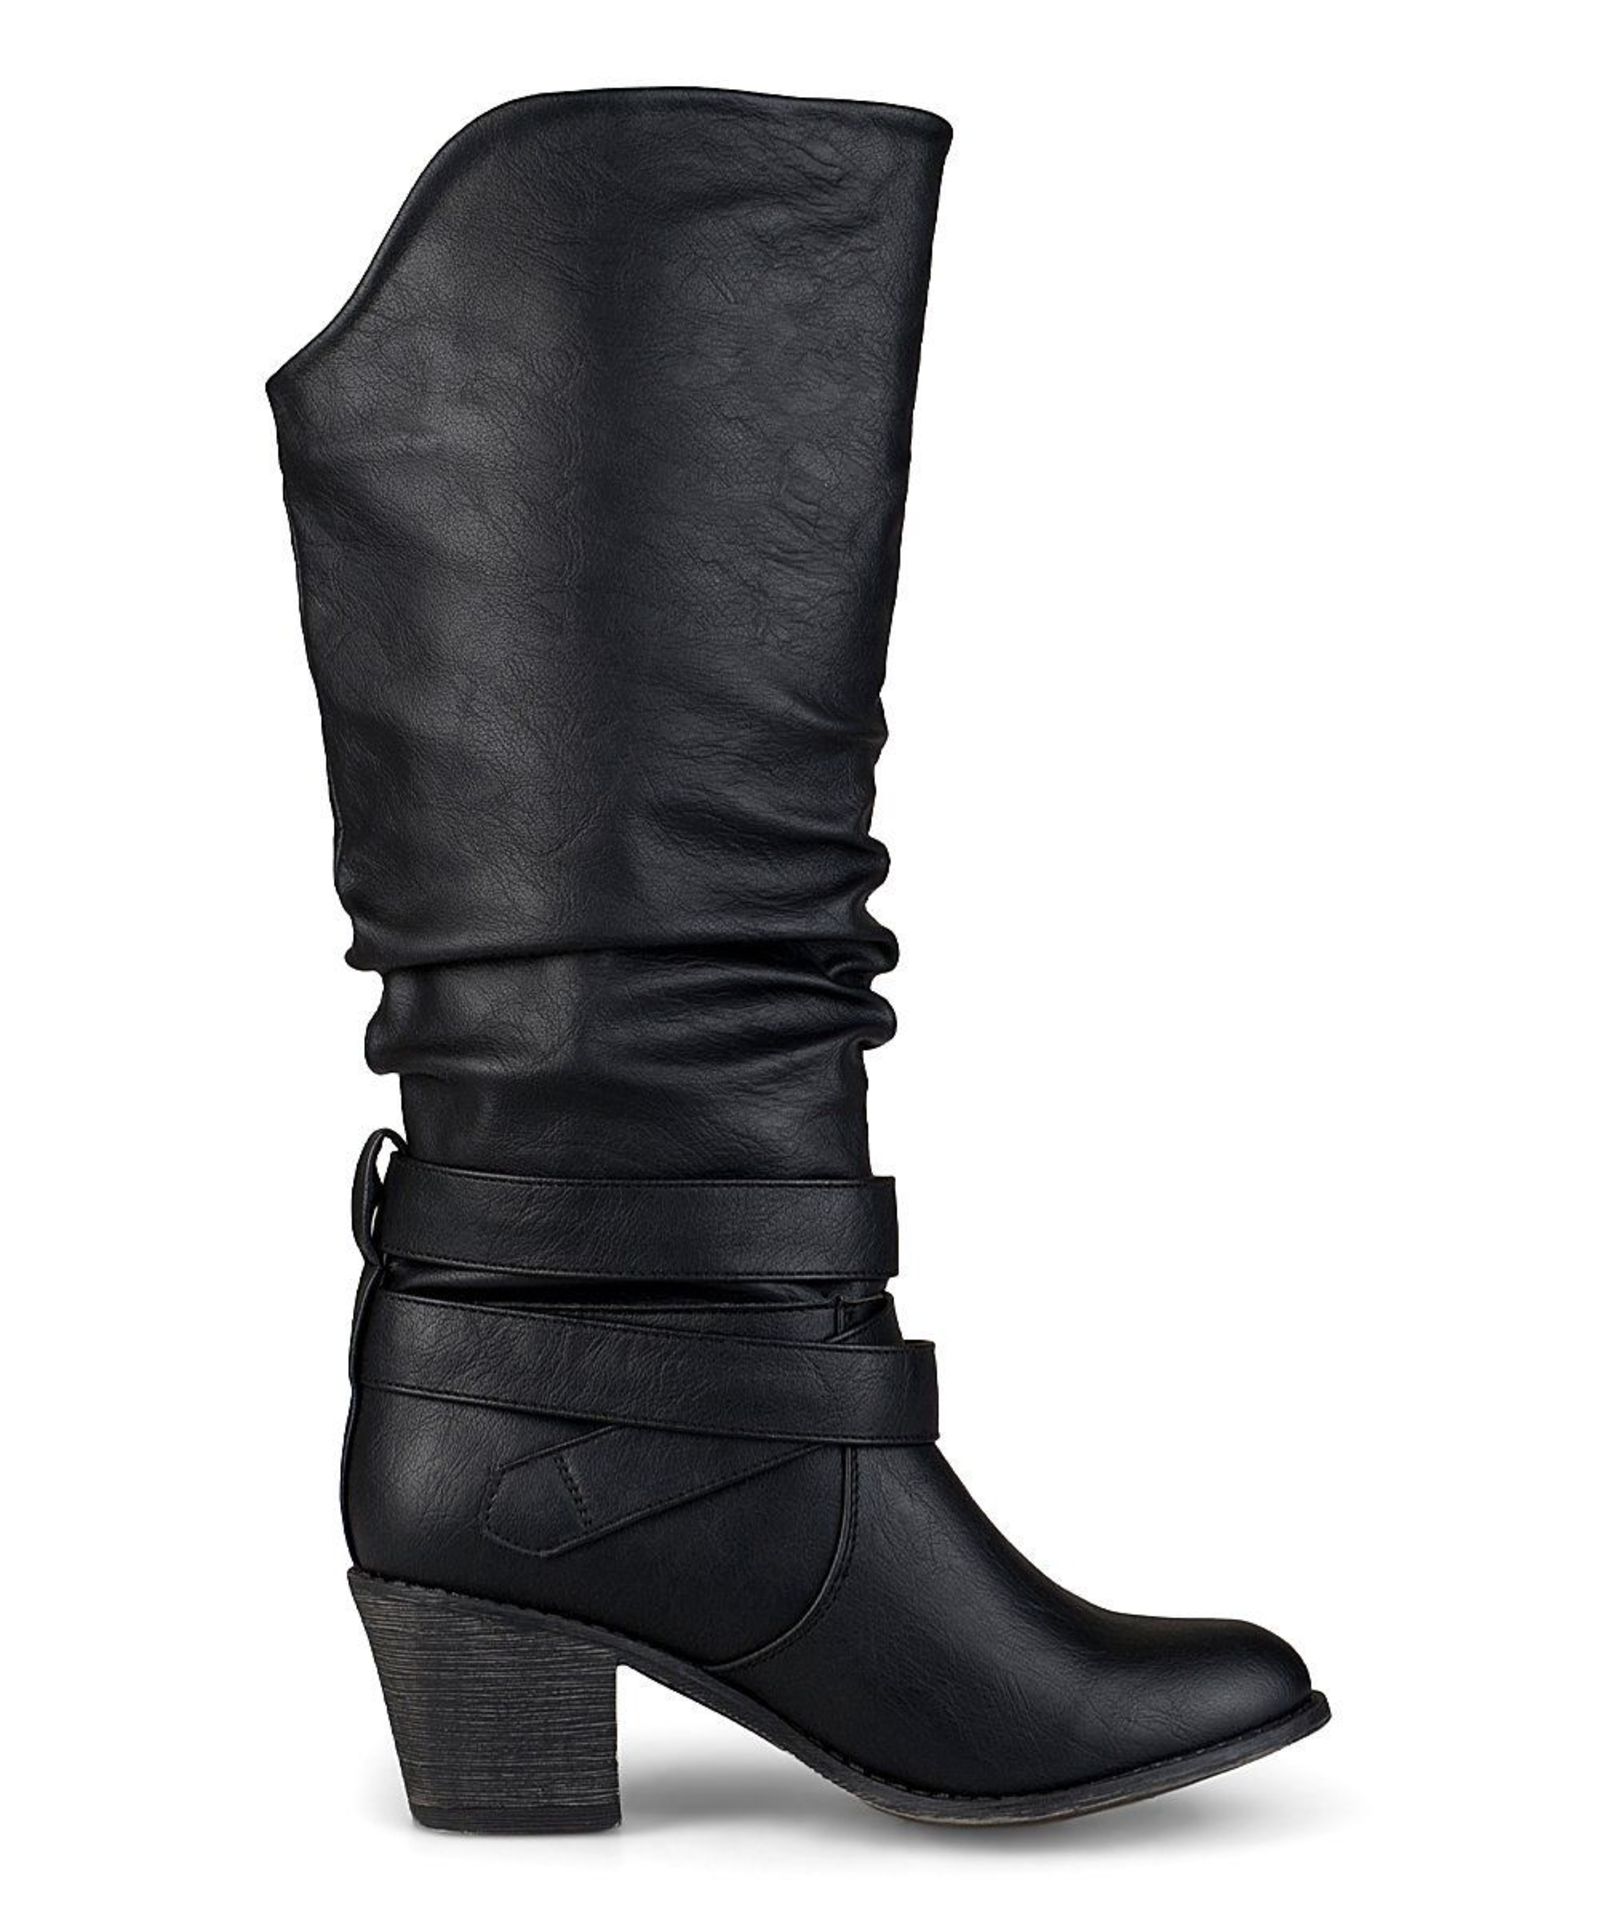 Brinley Co. Black Early Wide-Calf Boot (Uk Size 3.5:Us Size 6) (New with box) [Ref: 42973616-A-003] - Image 3 of 5